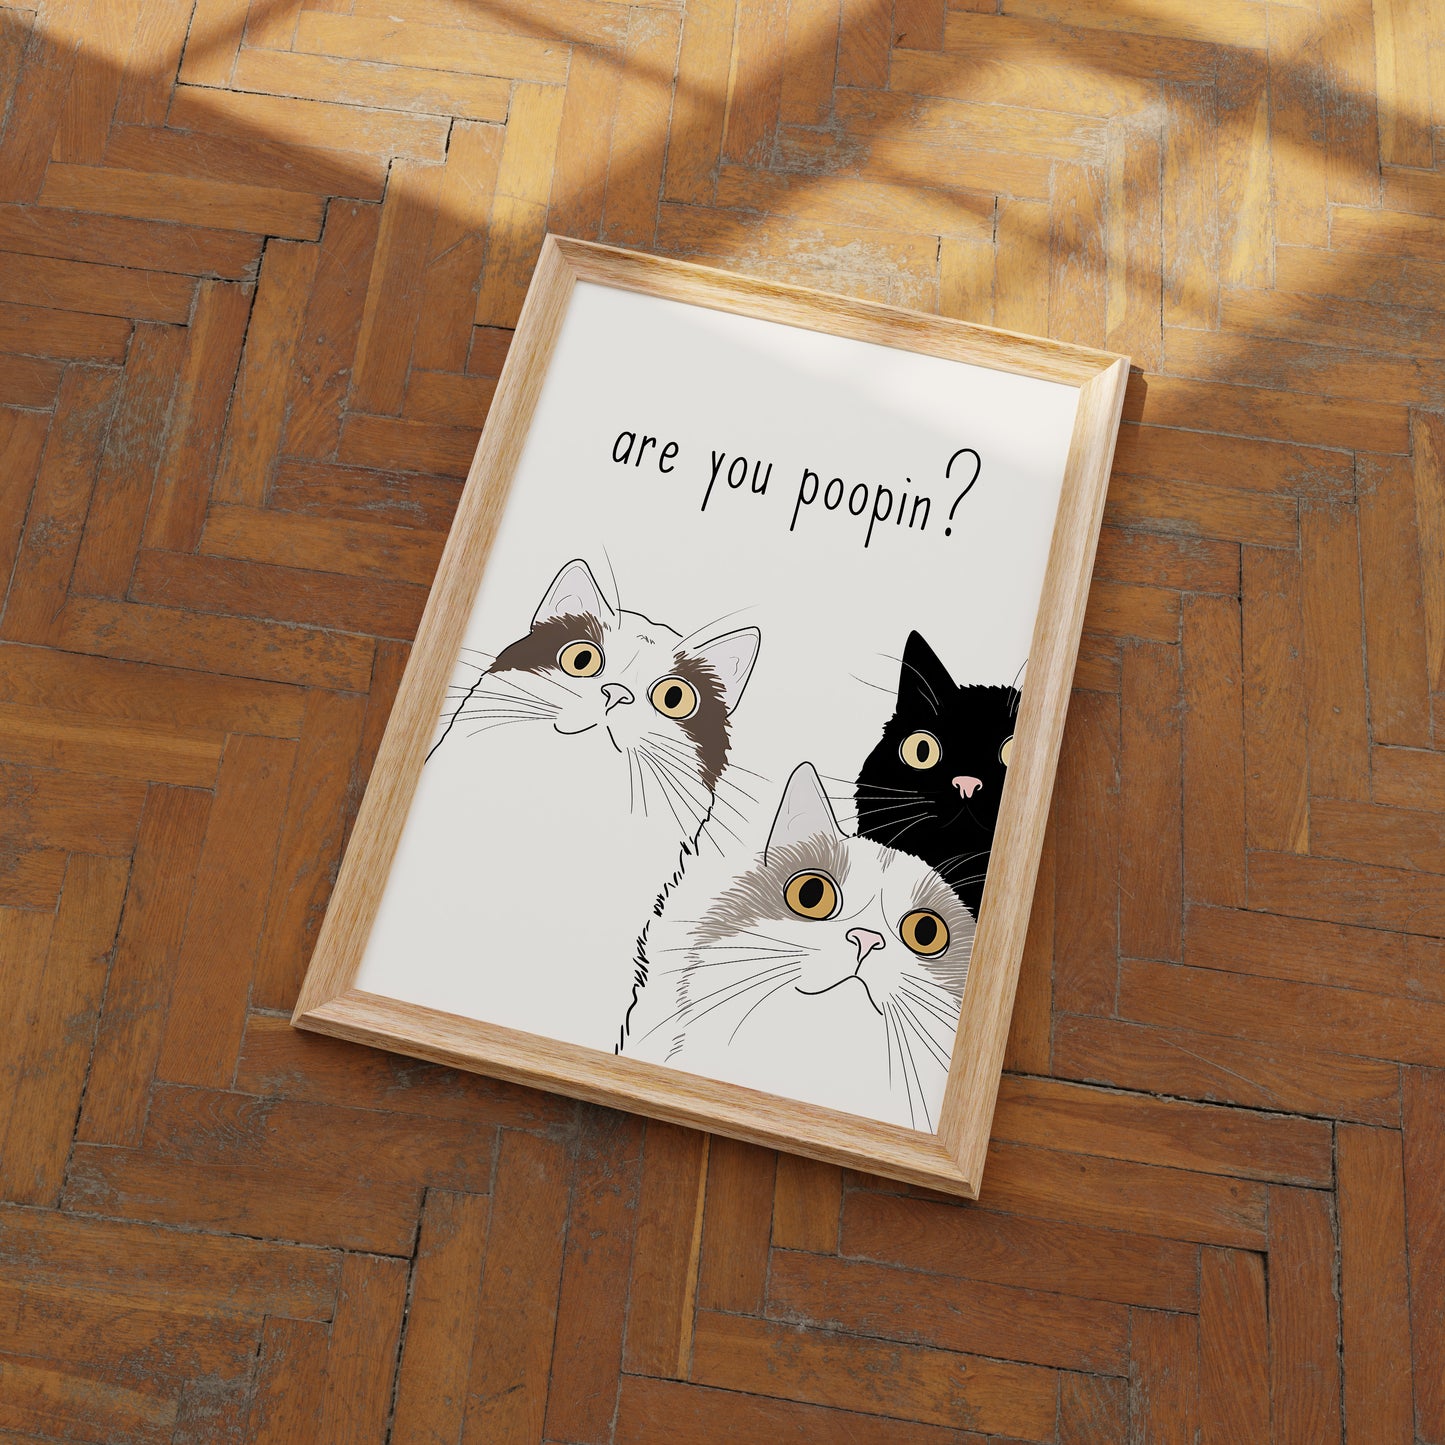 A framed illustration of three curious cats with the caption "are you poopin?" on a wooden floor.